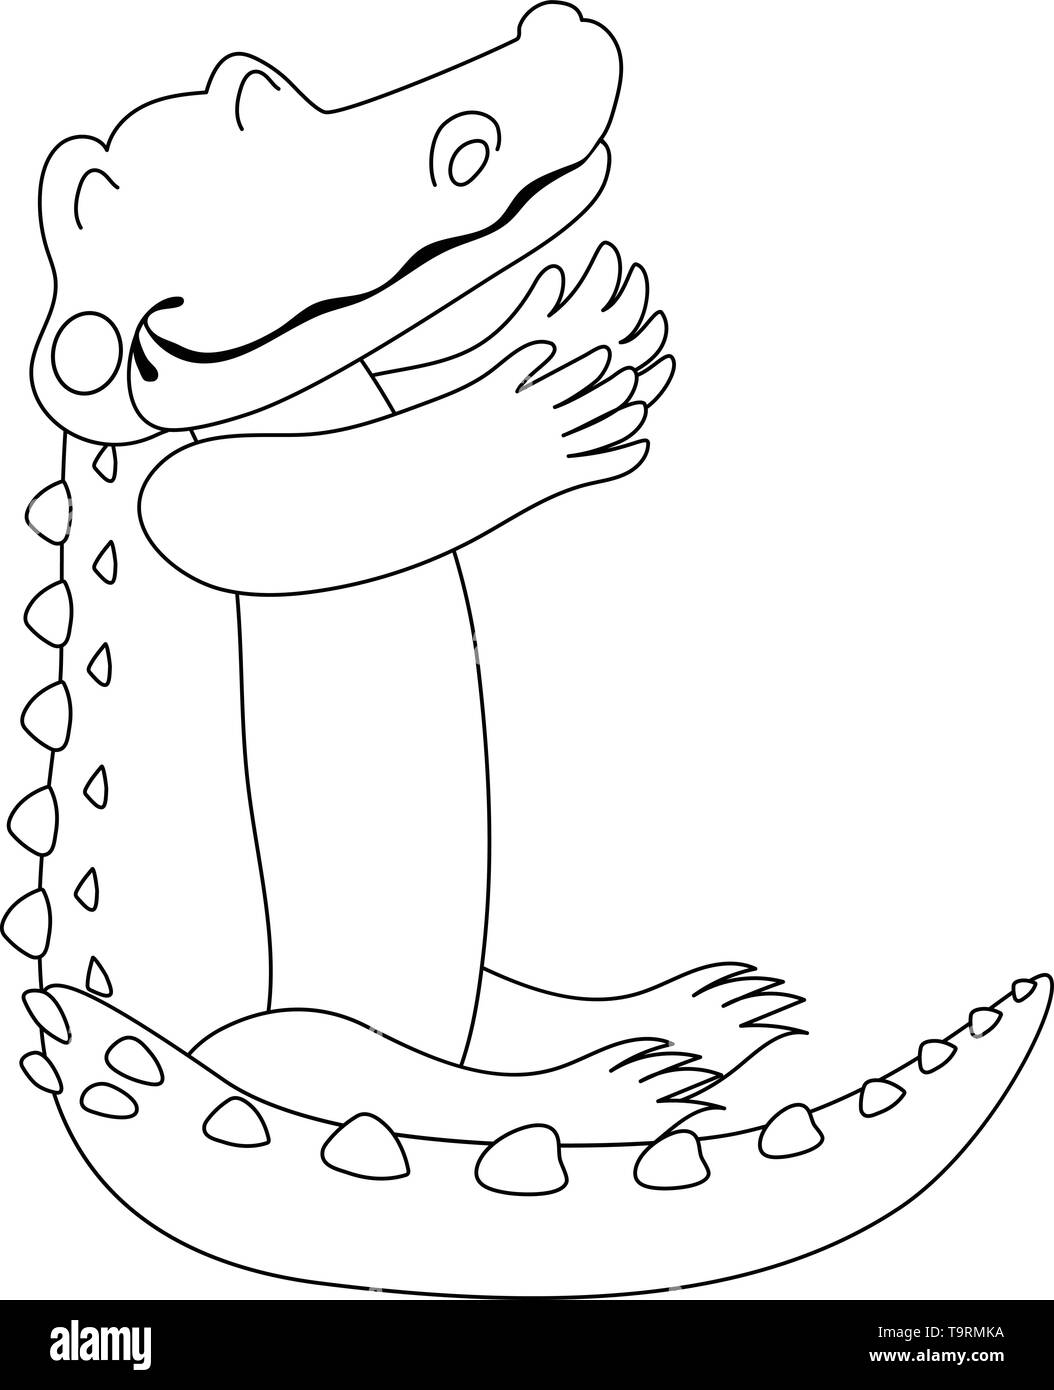 Alligator clipart Black and White Stock Photos & Images - Alamy